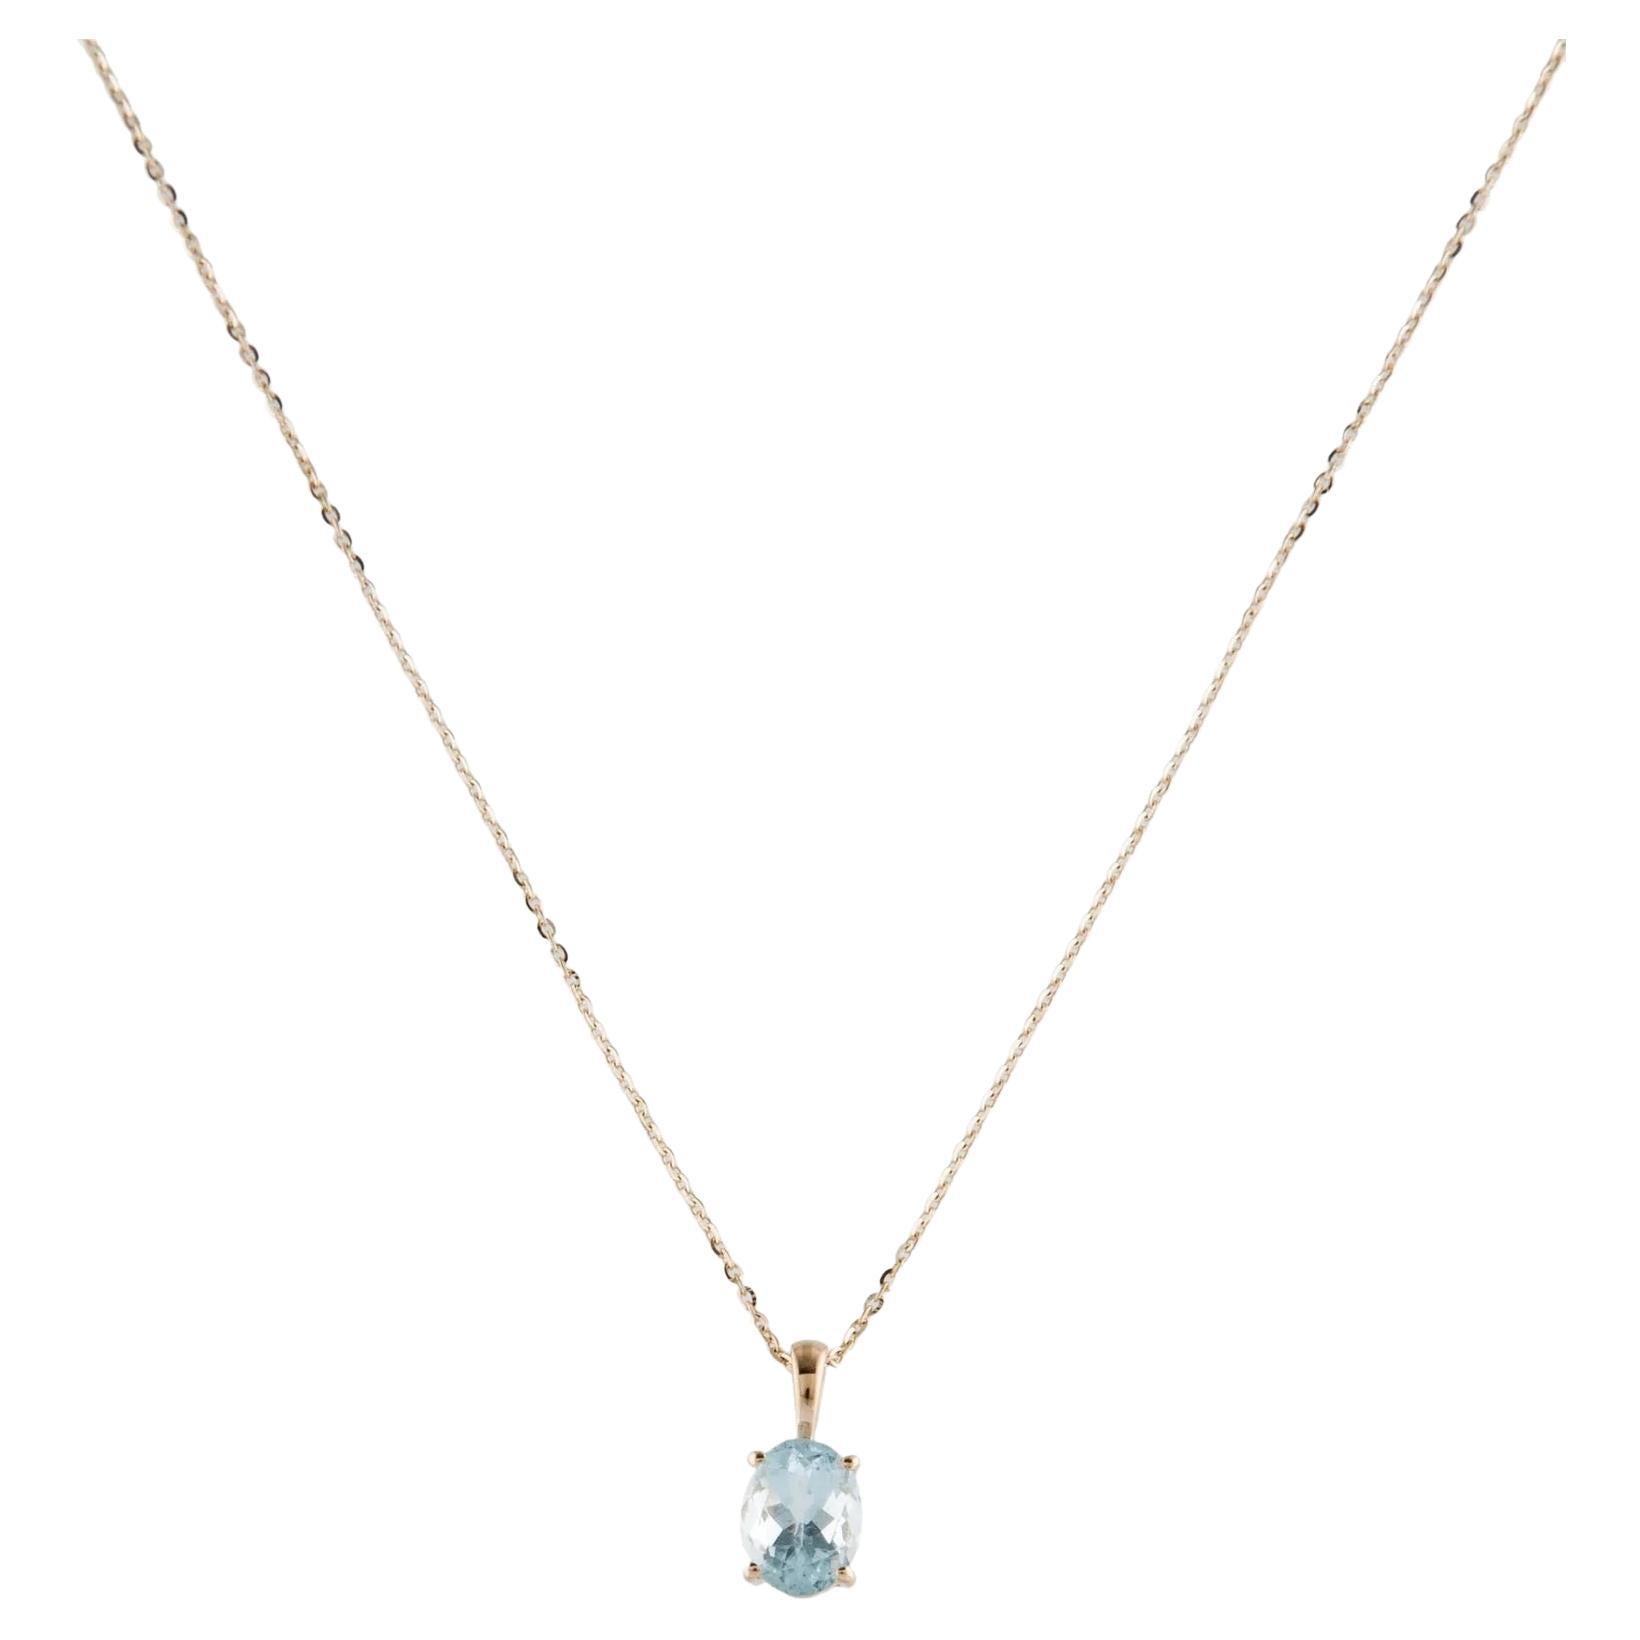 14K Yellow Gold Necklace with Oval Modified Brilliant Aquamarine Pendant, 16